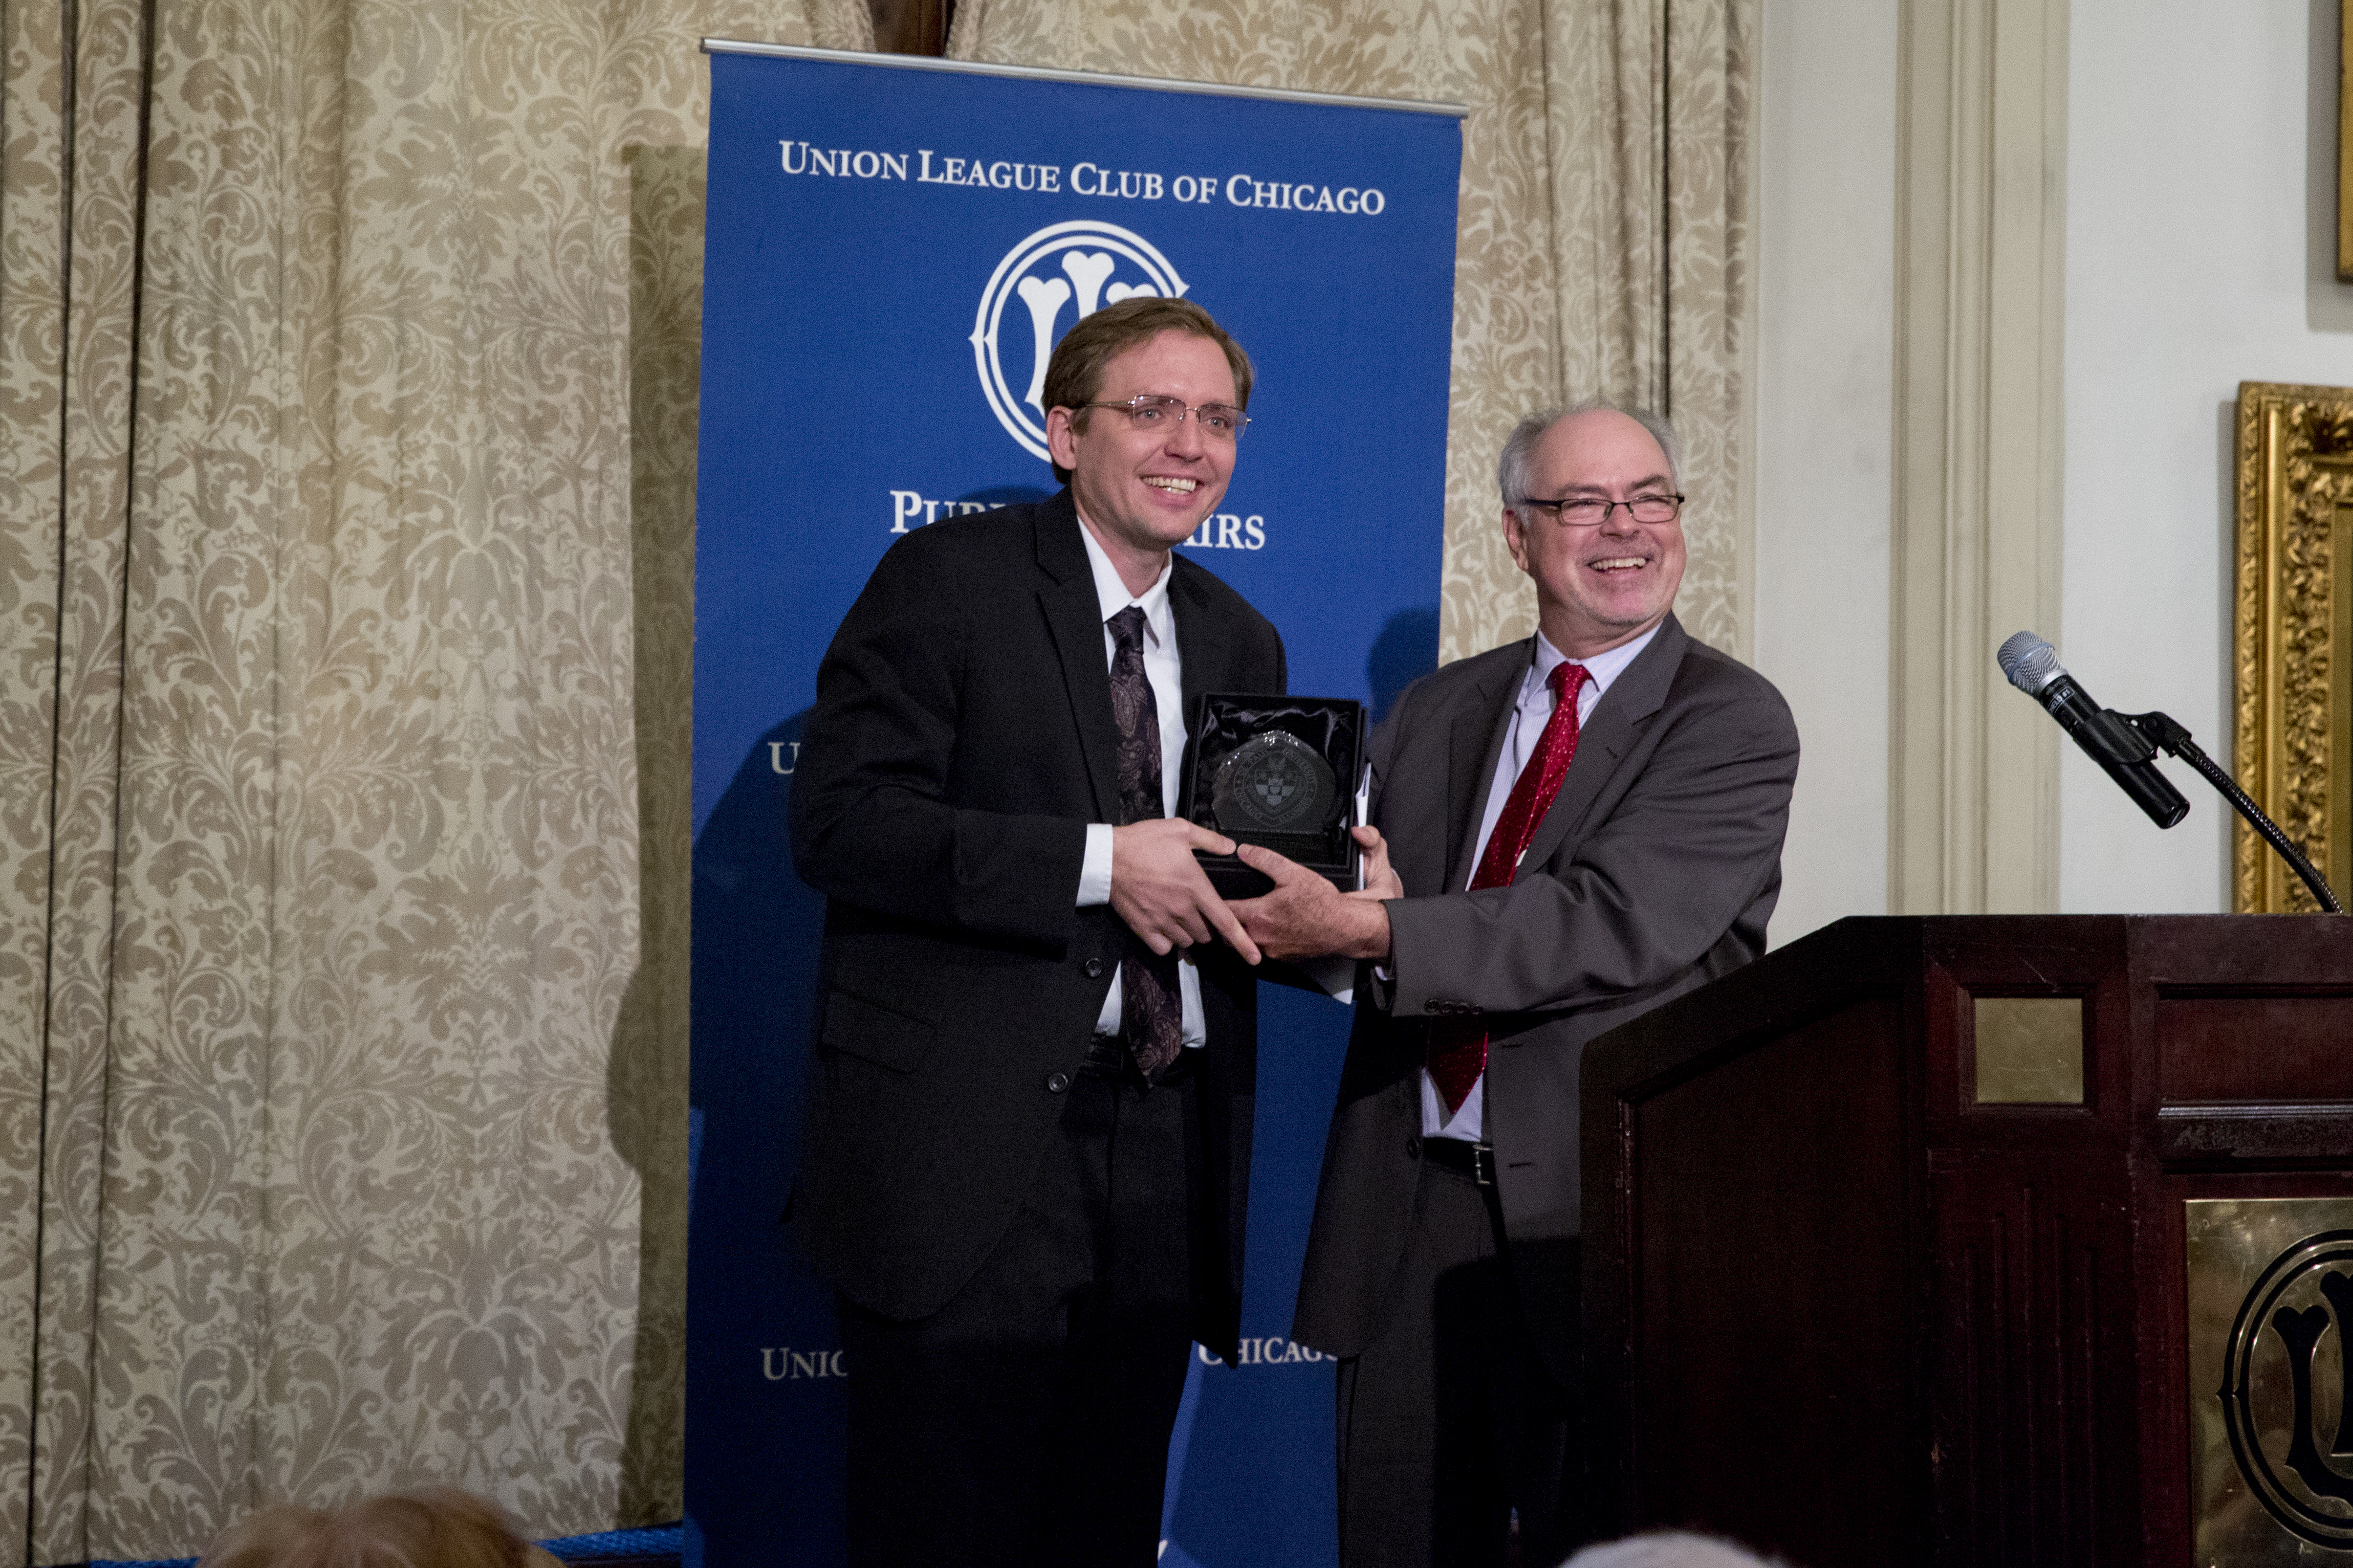 Alumnus Ben Welsh and Center for Journalism Integrity and Excellence Co-Director Don Moseley. Photo by Sandy Rosencrans.